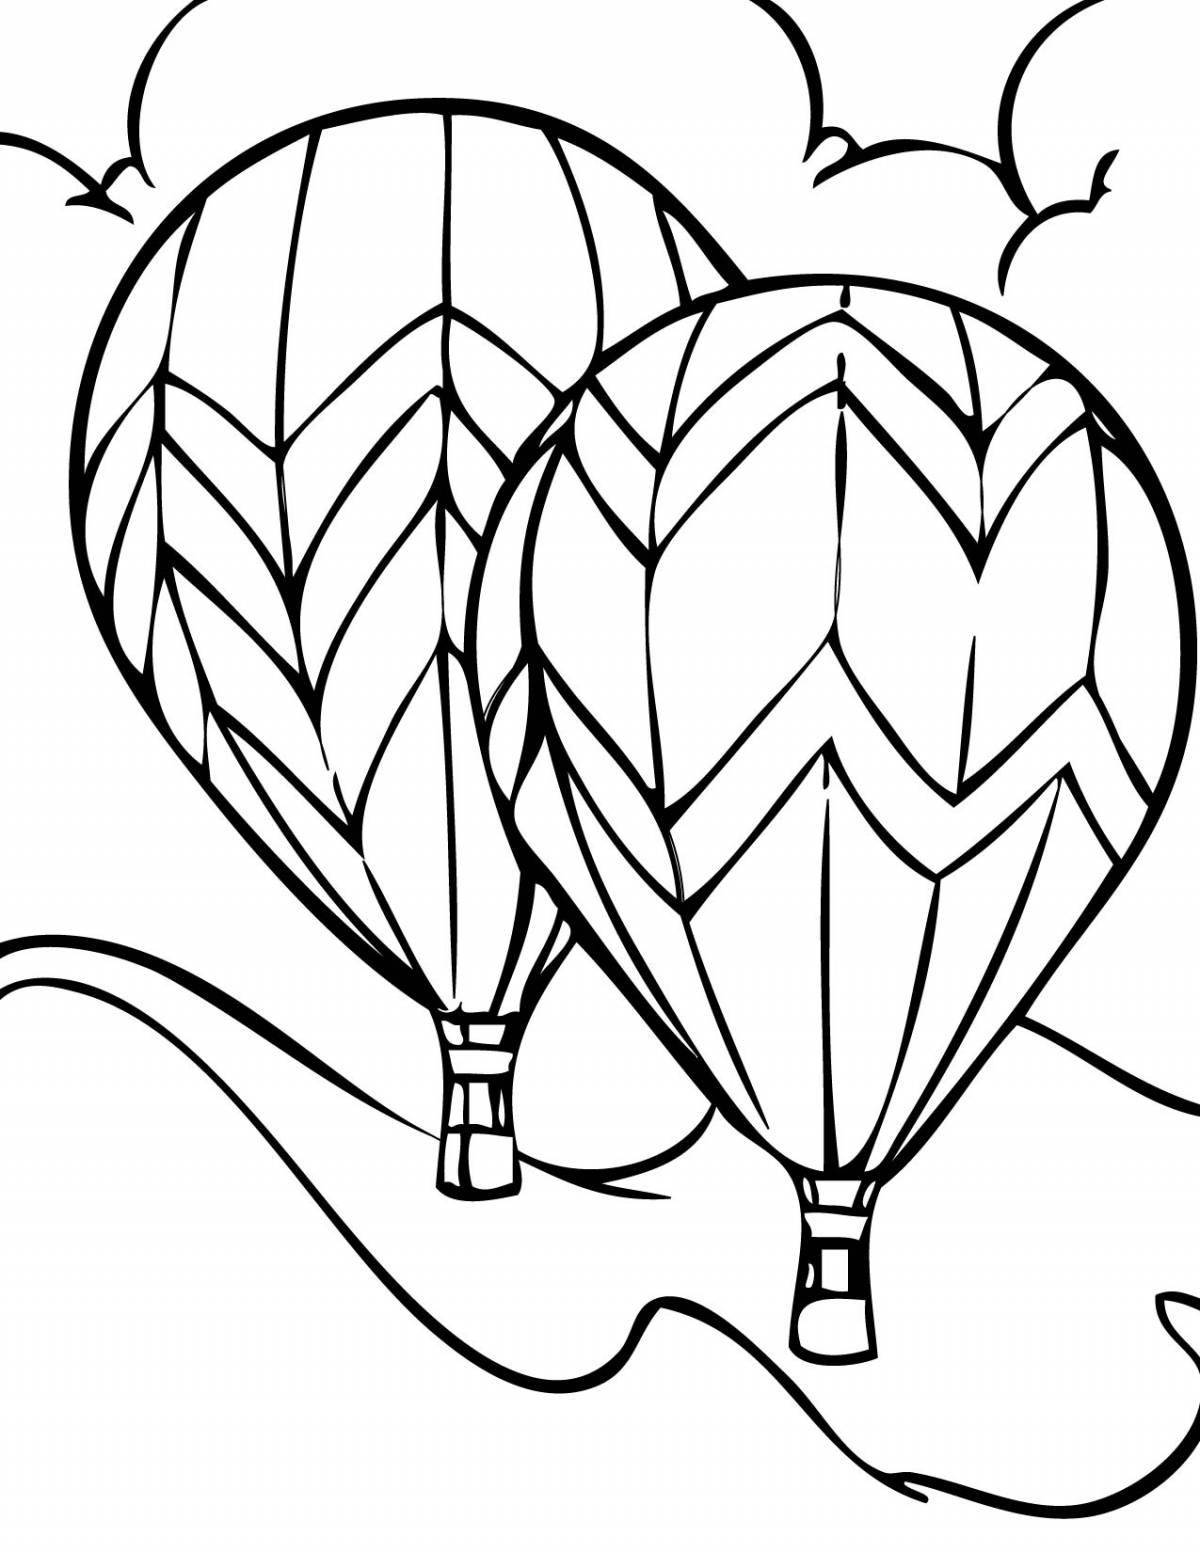 Coloring book with colorful balloons for kids